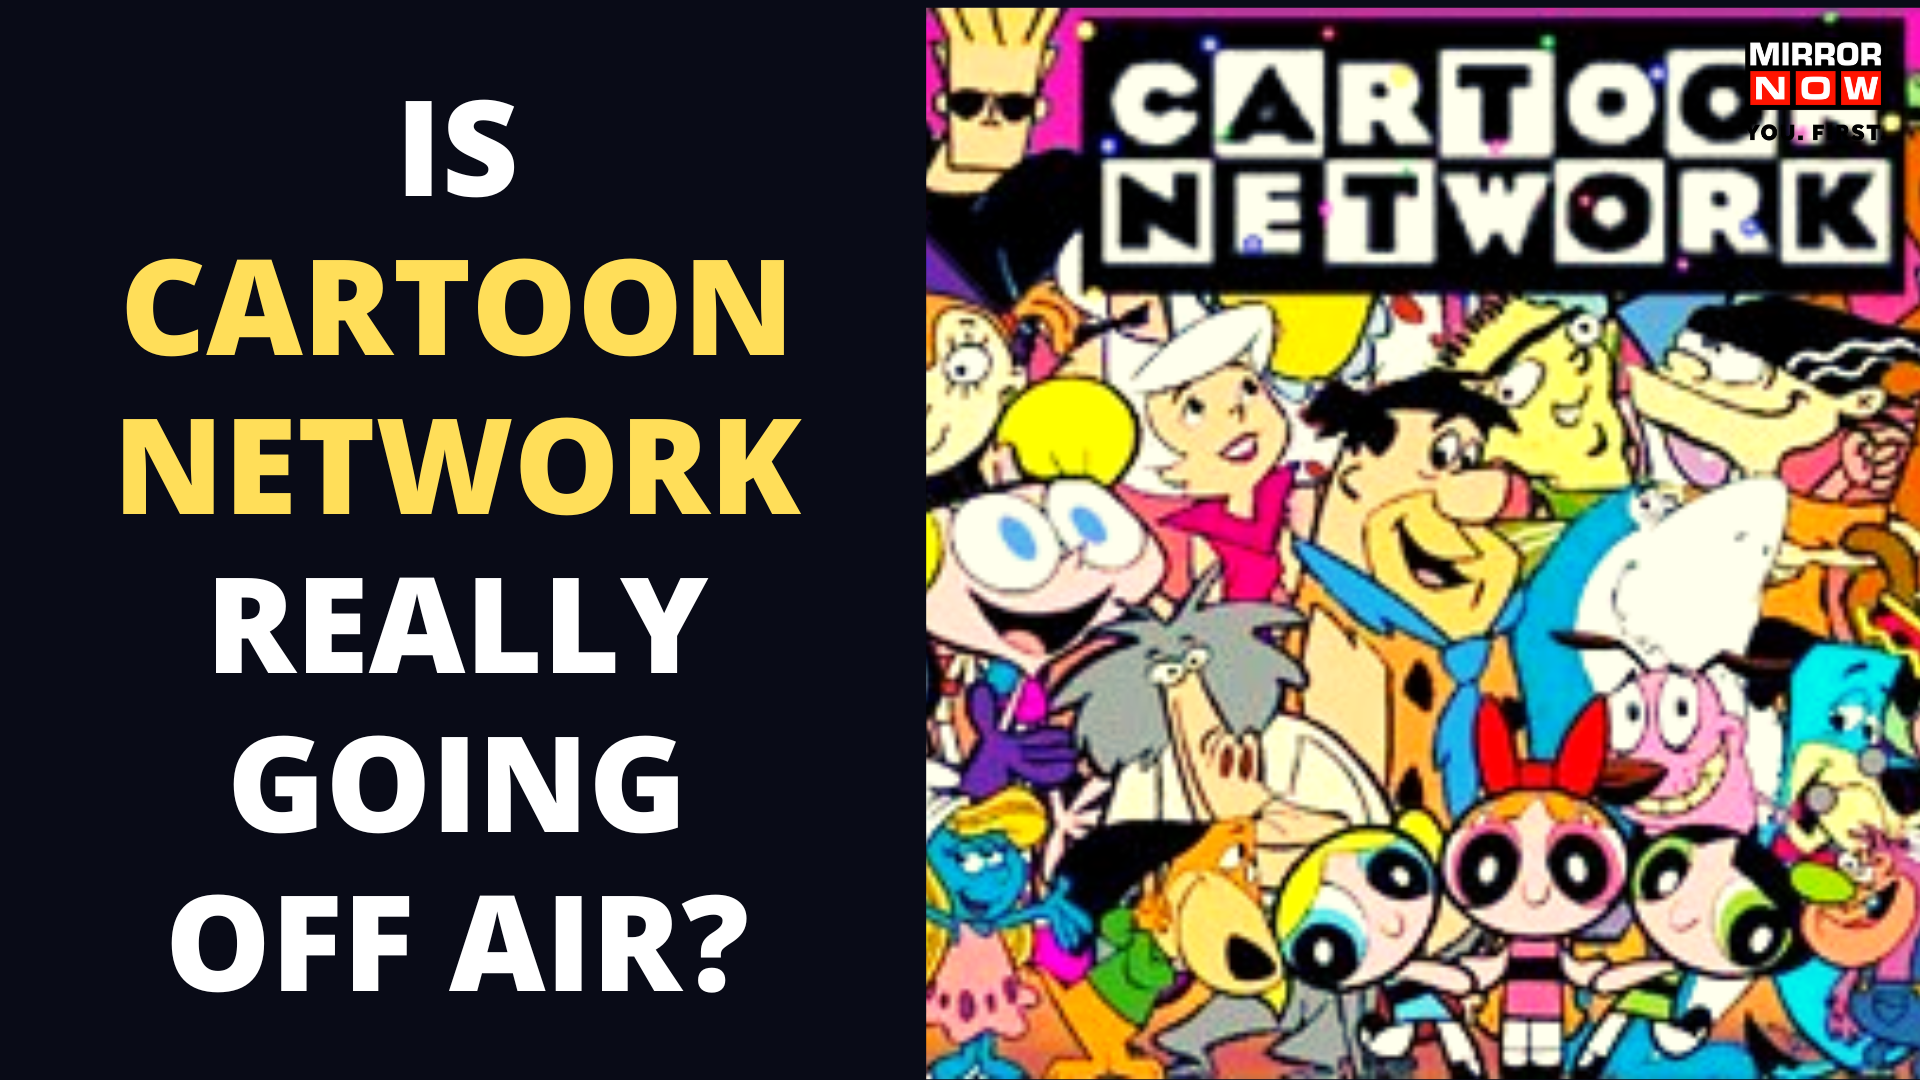 Adults mourn merger of Cartoon Network but kids are not watching linear TV  anymore: Here's why